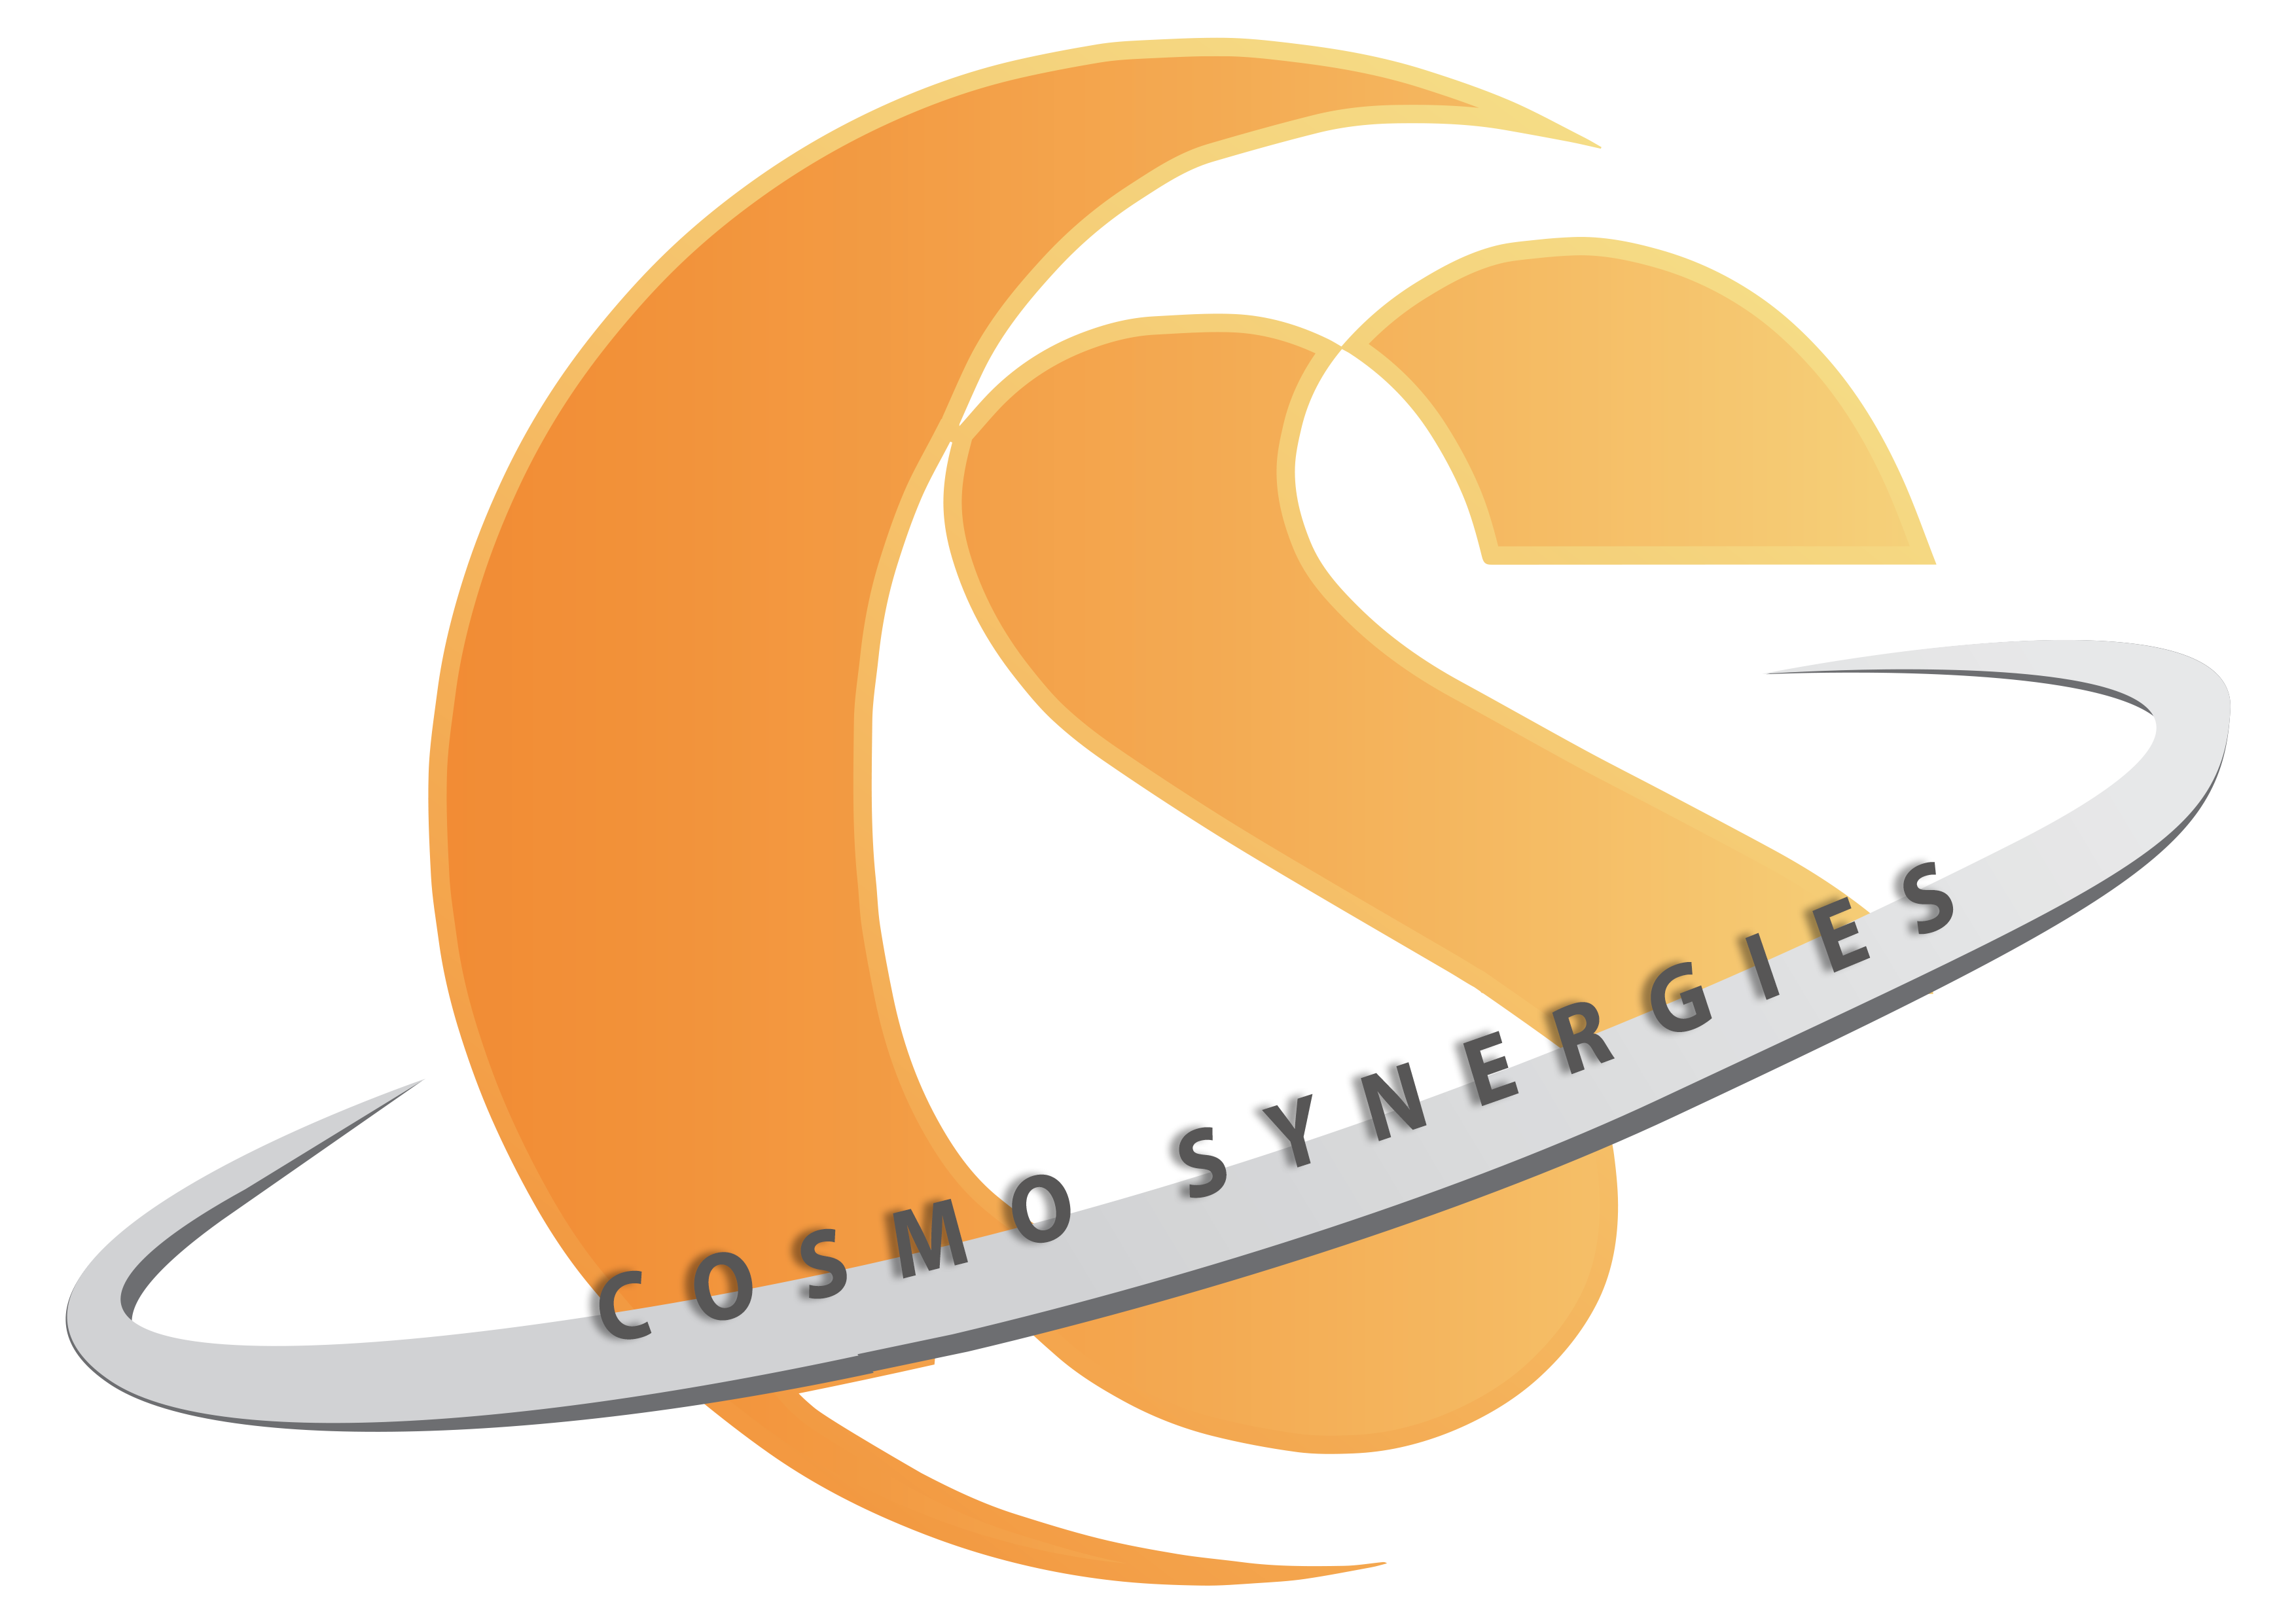 COSMO-SYNERGIES